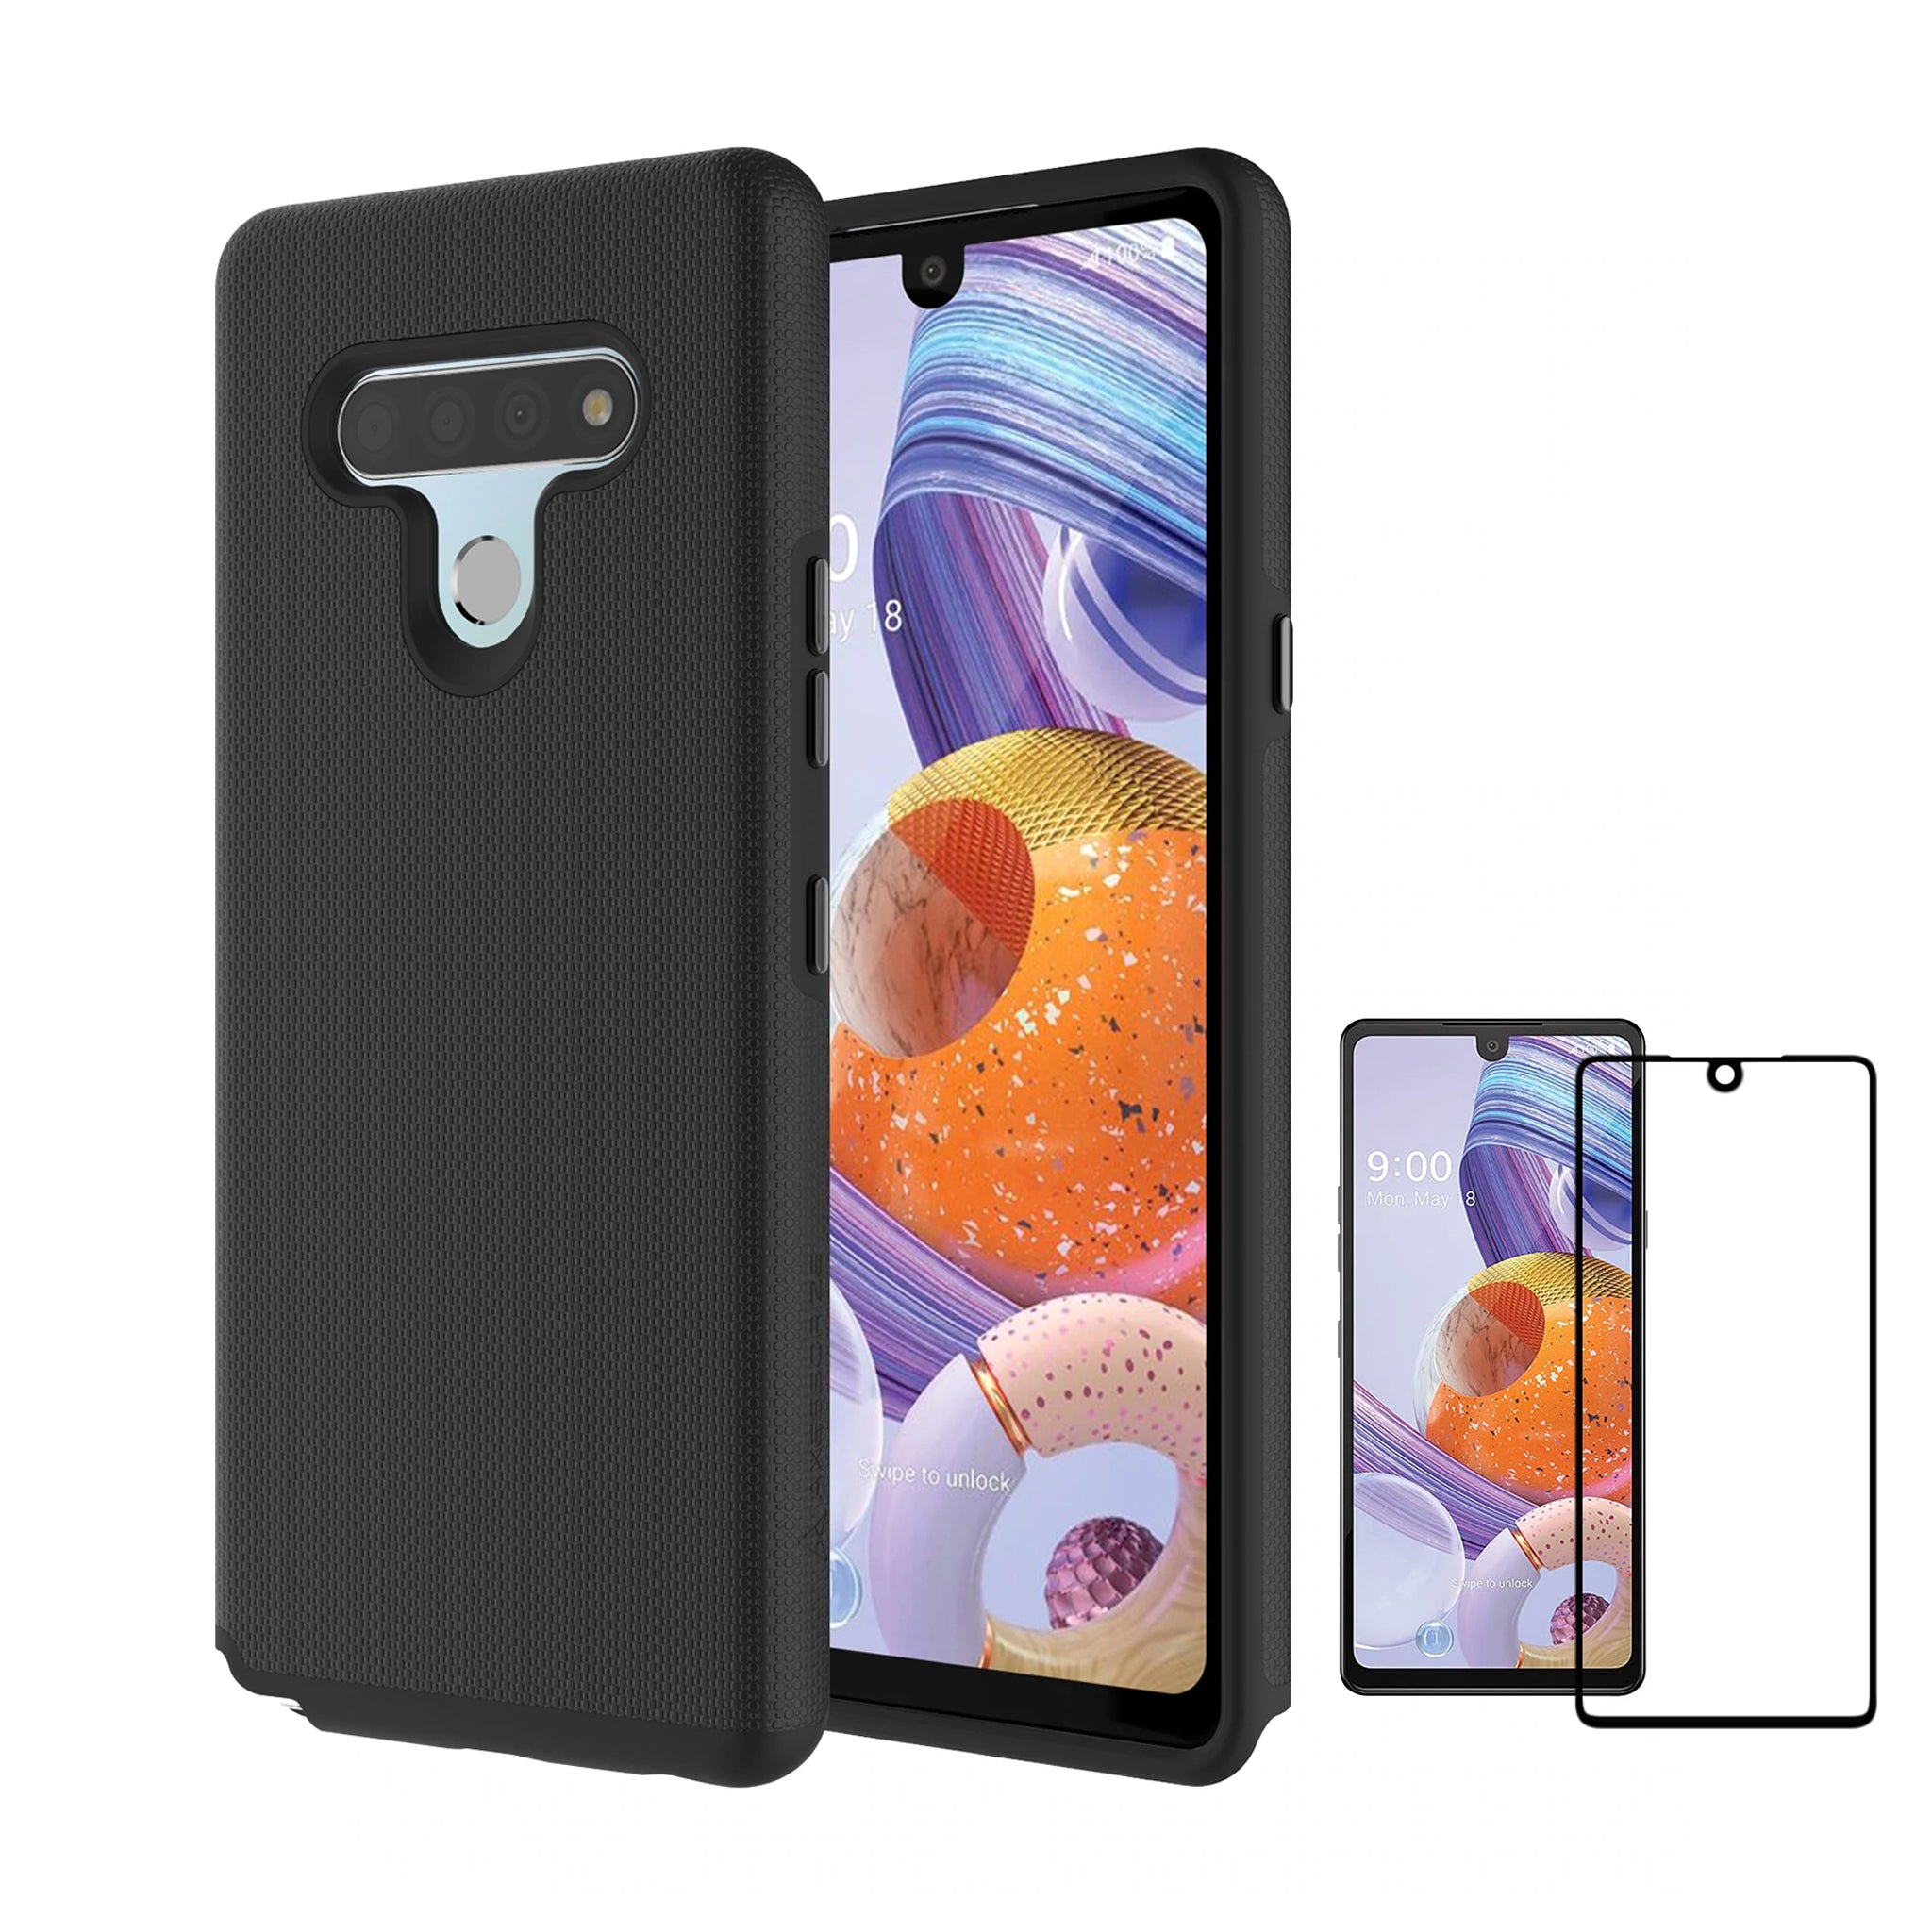 Axessorize - Protech Case And Glass Screen Protector For Lg Stylo 6 - Black